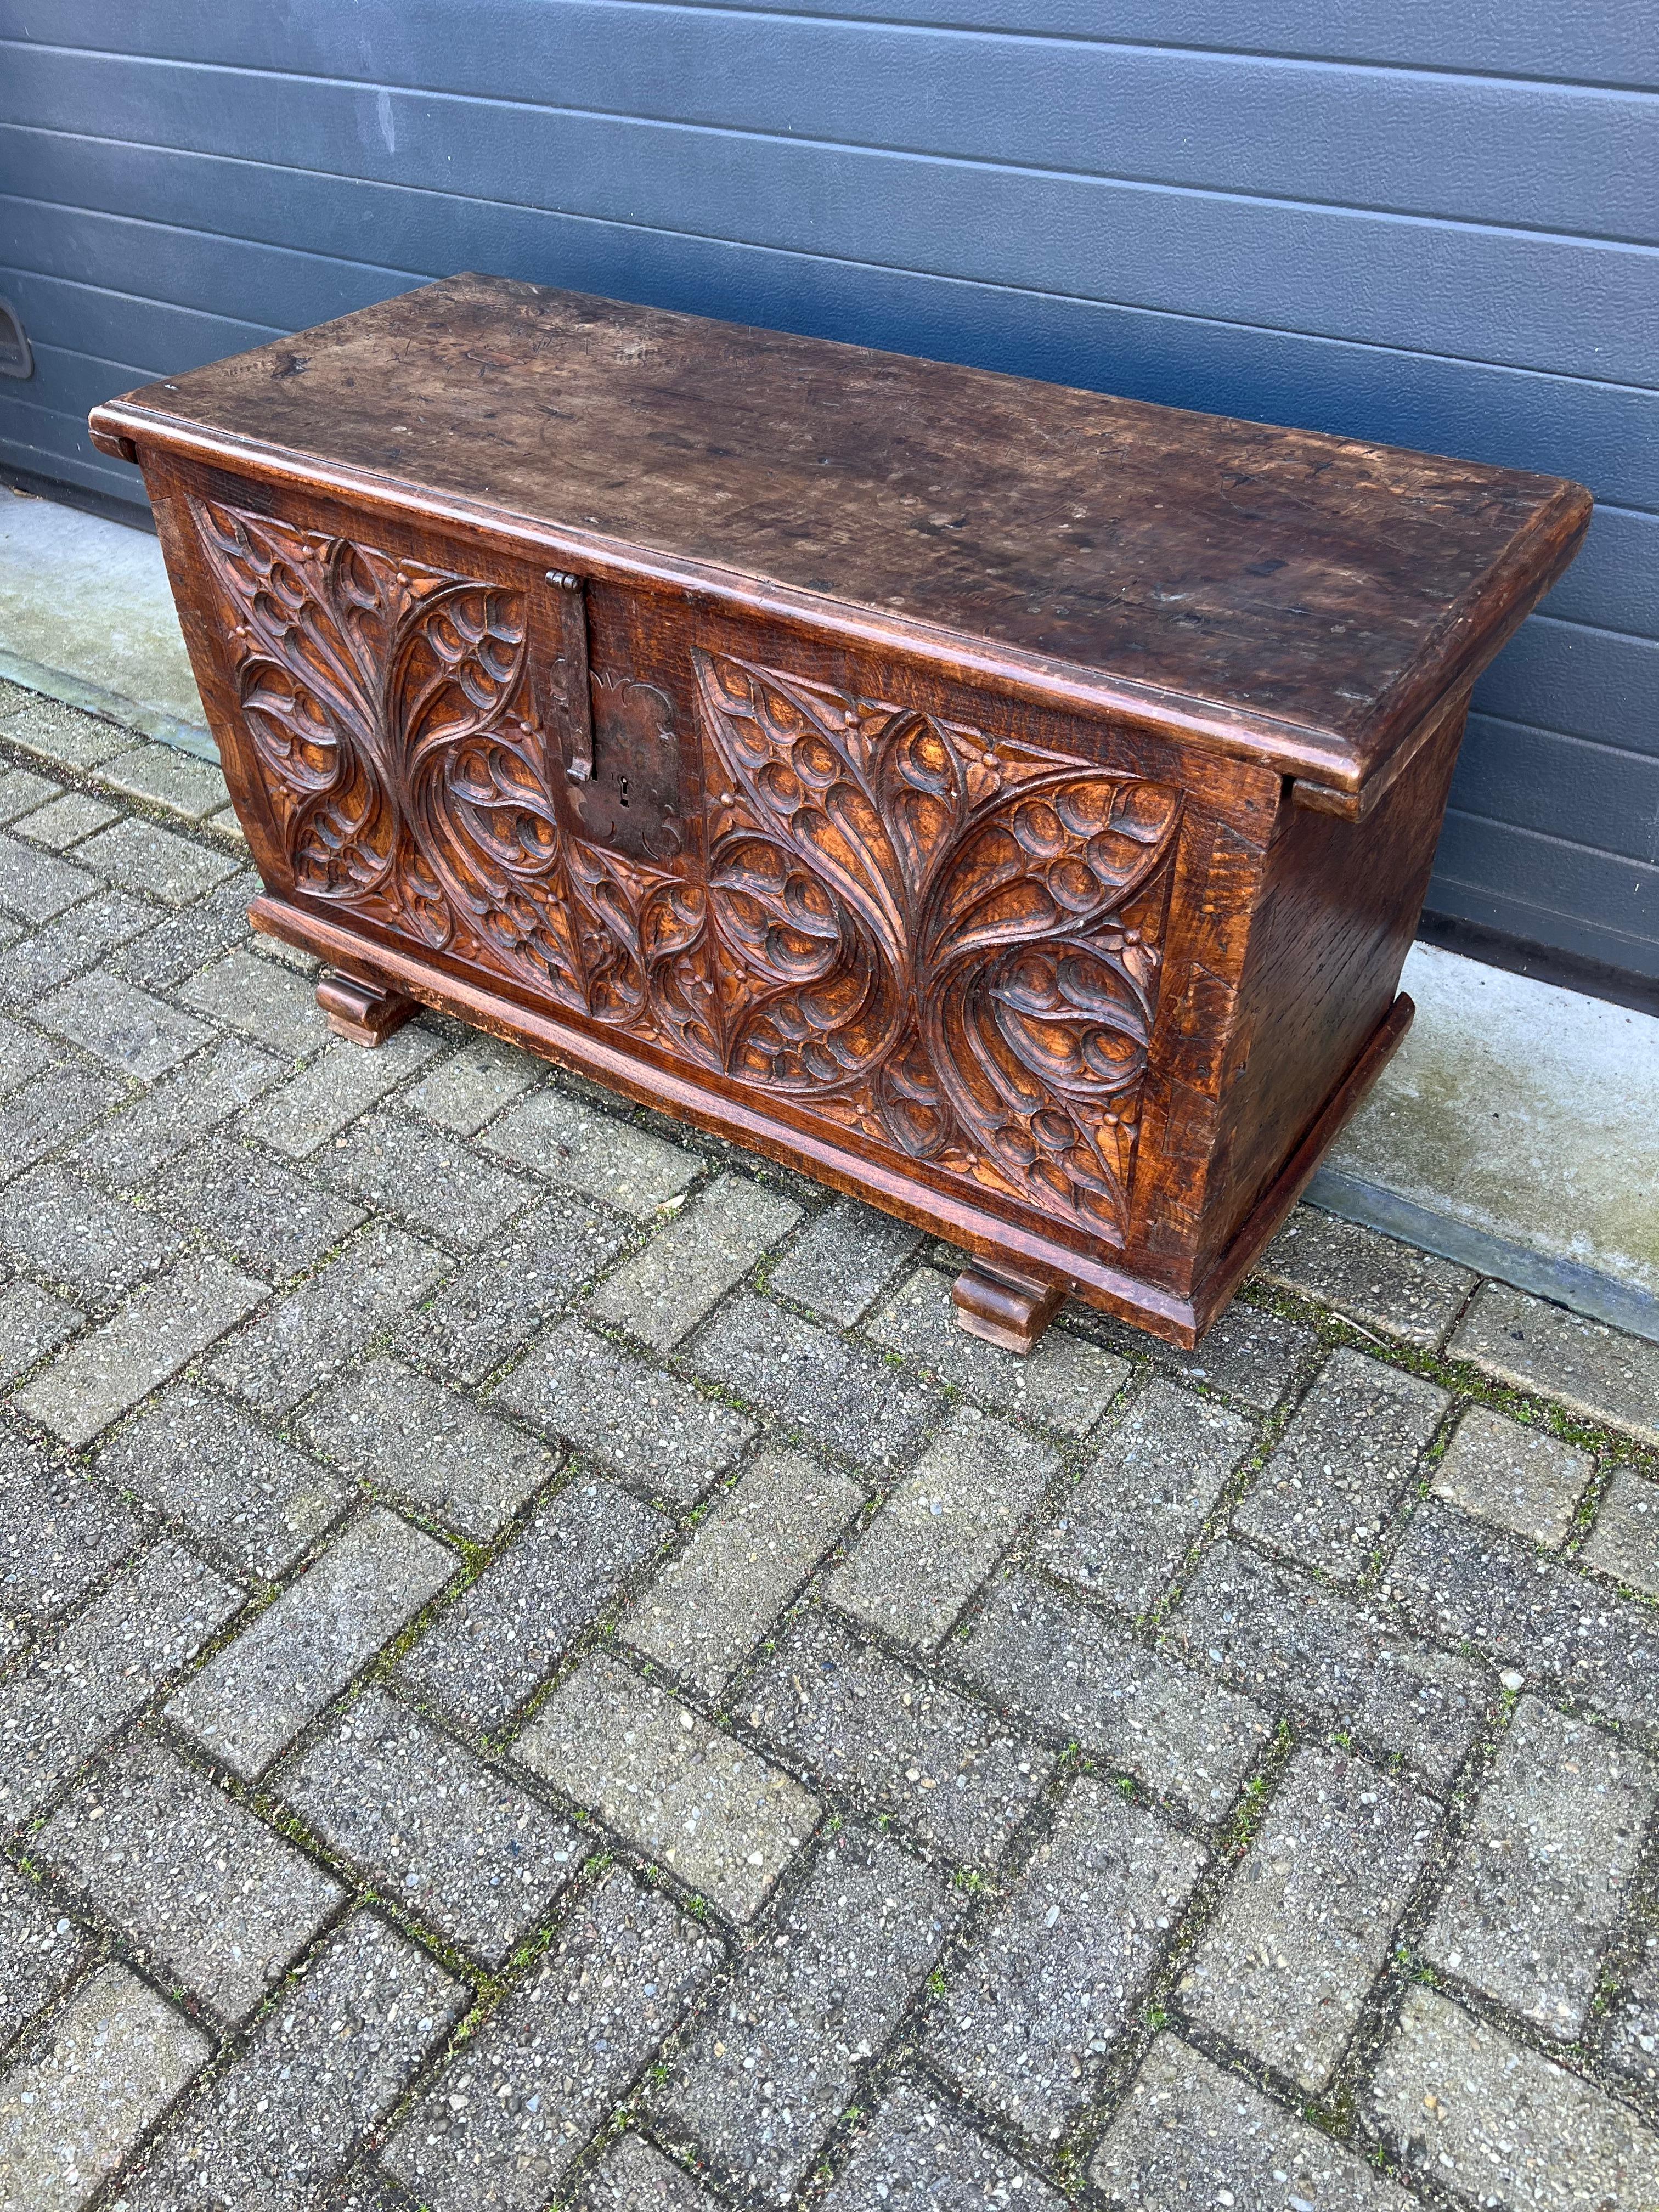 Stunning Antique Gothic Revival Hand Carved Elm Wood Blanket Chest / Trunk 1750 For Sale 8